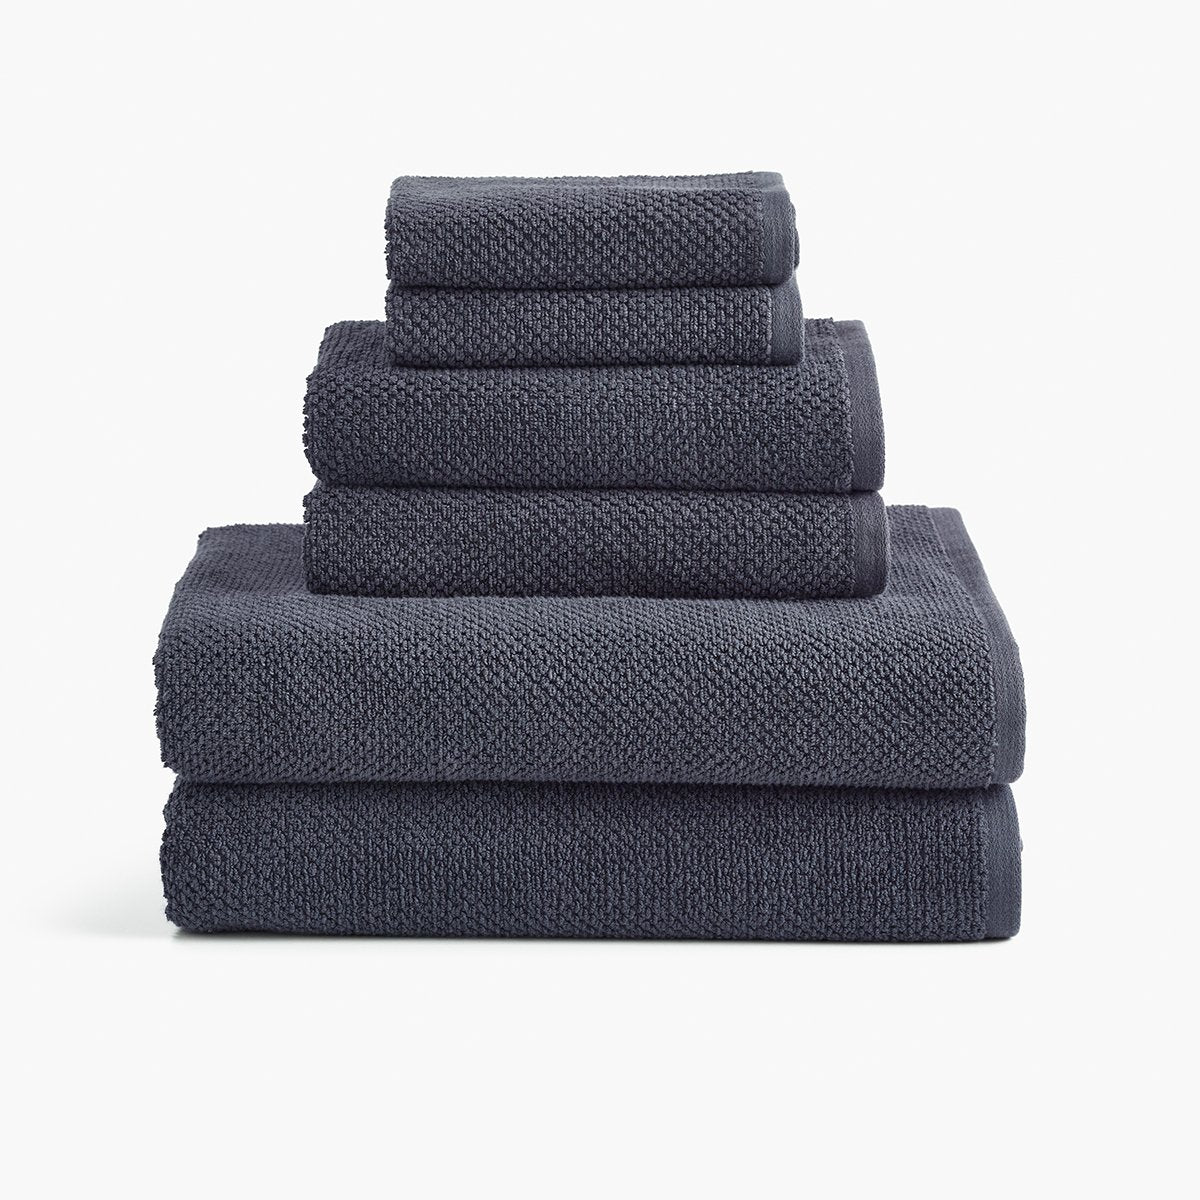 Under The Canopy Textured Organic Cotton Towel - Charcoal, Charcoal / Bath Towel Bath Towel Charcoal